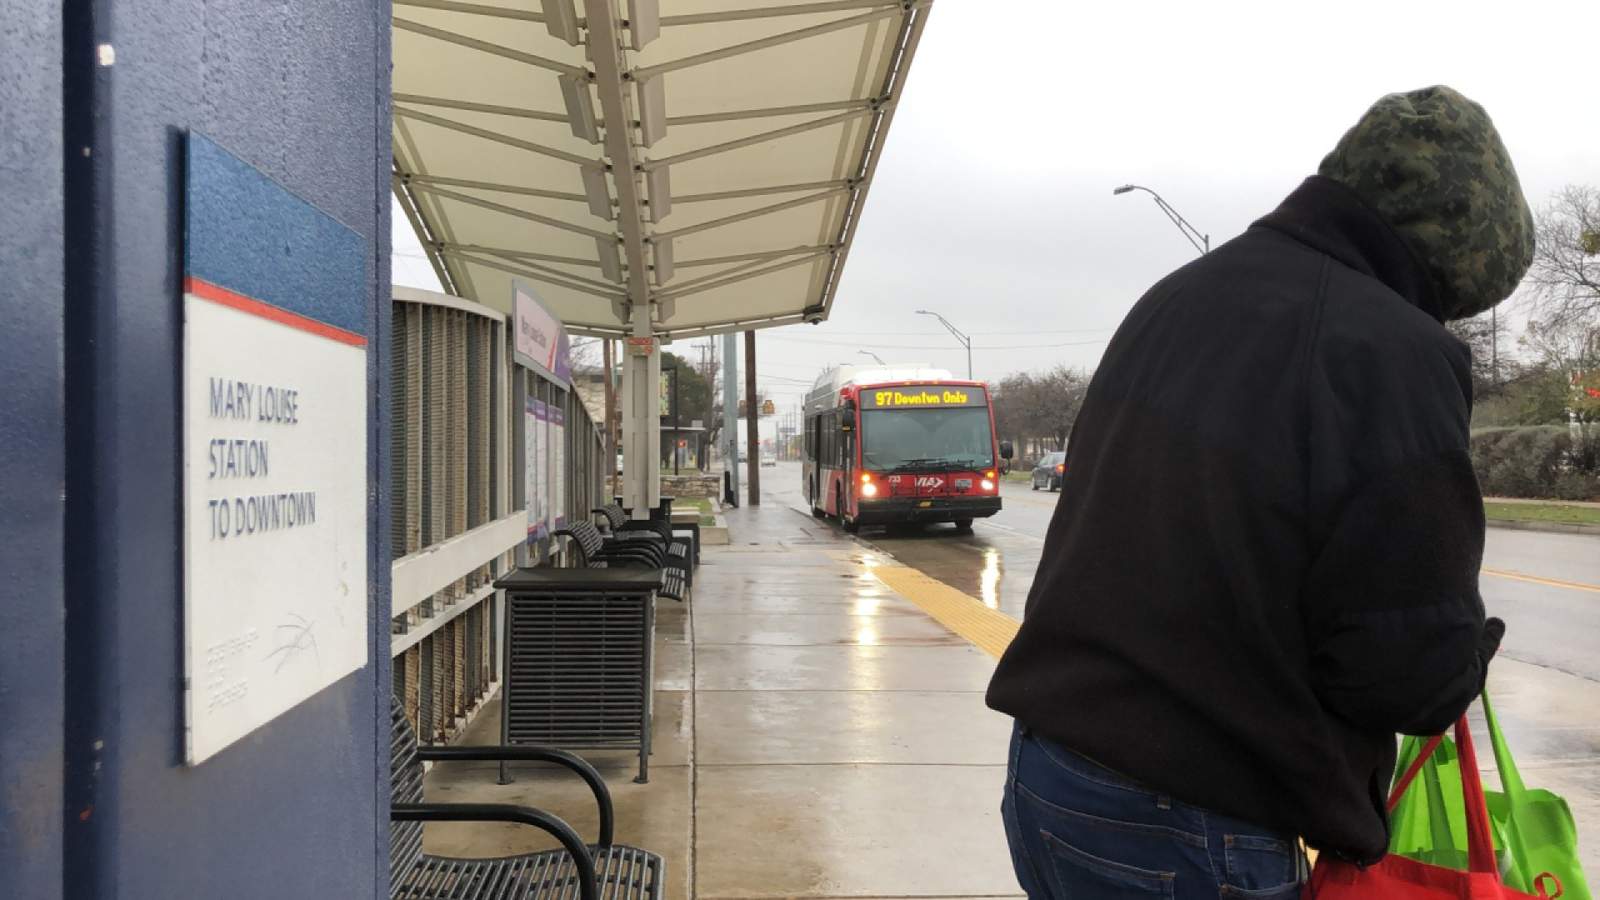 Passengers have longer wait times at VIA Transit bus stops due to icy roads, wintry conditions